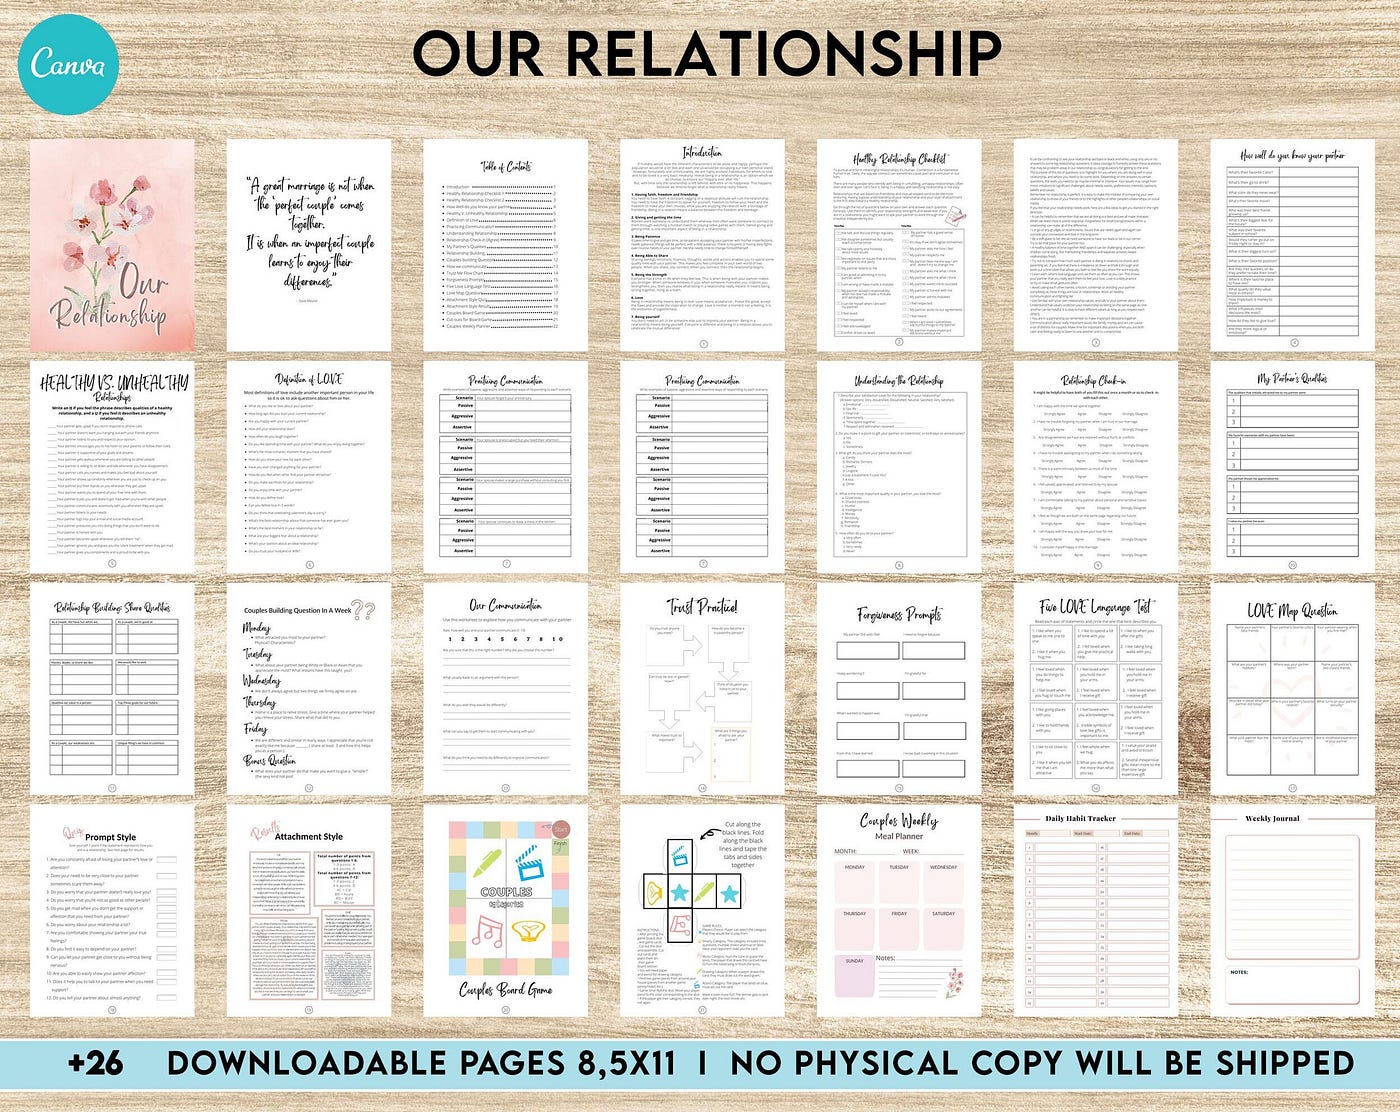 Couples Therapy Journal: Couples Counseling, Marriage, Engaged, Love,  Breakup, Relationship, Newlywed, Fiance, Premarital, Canva Editable  Templates, Kdp interior, by KDPinterior.com